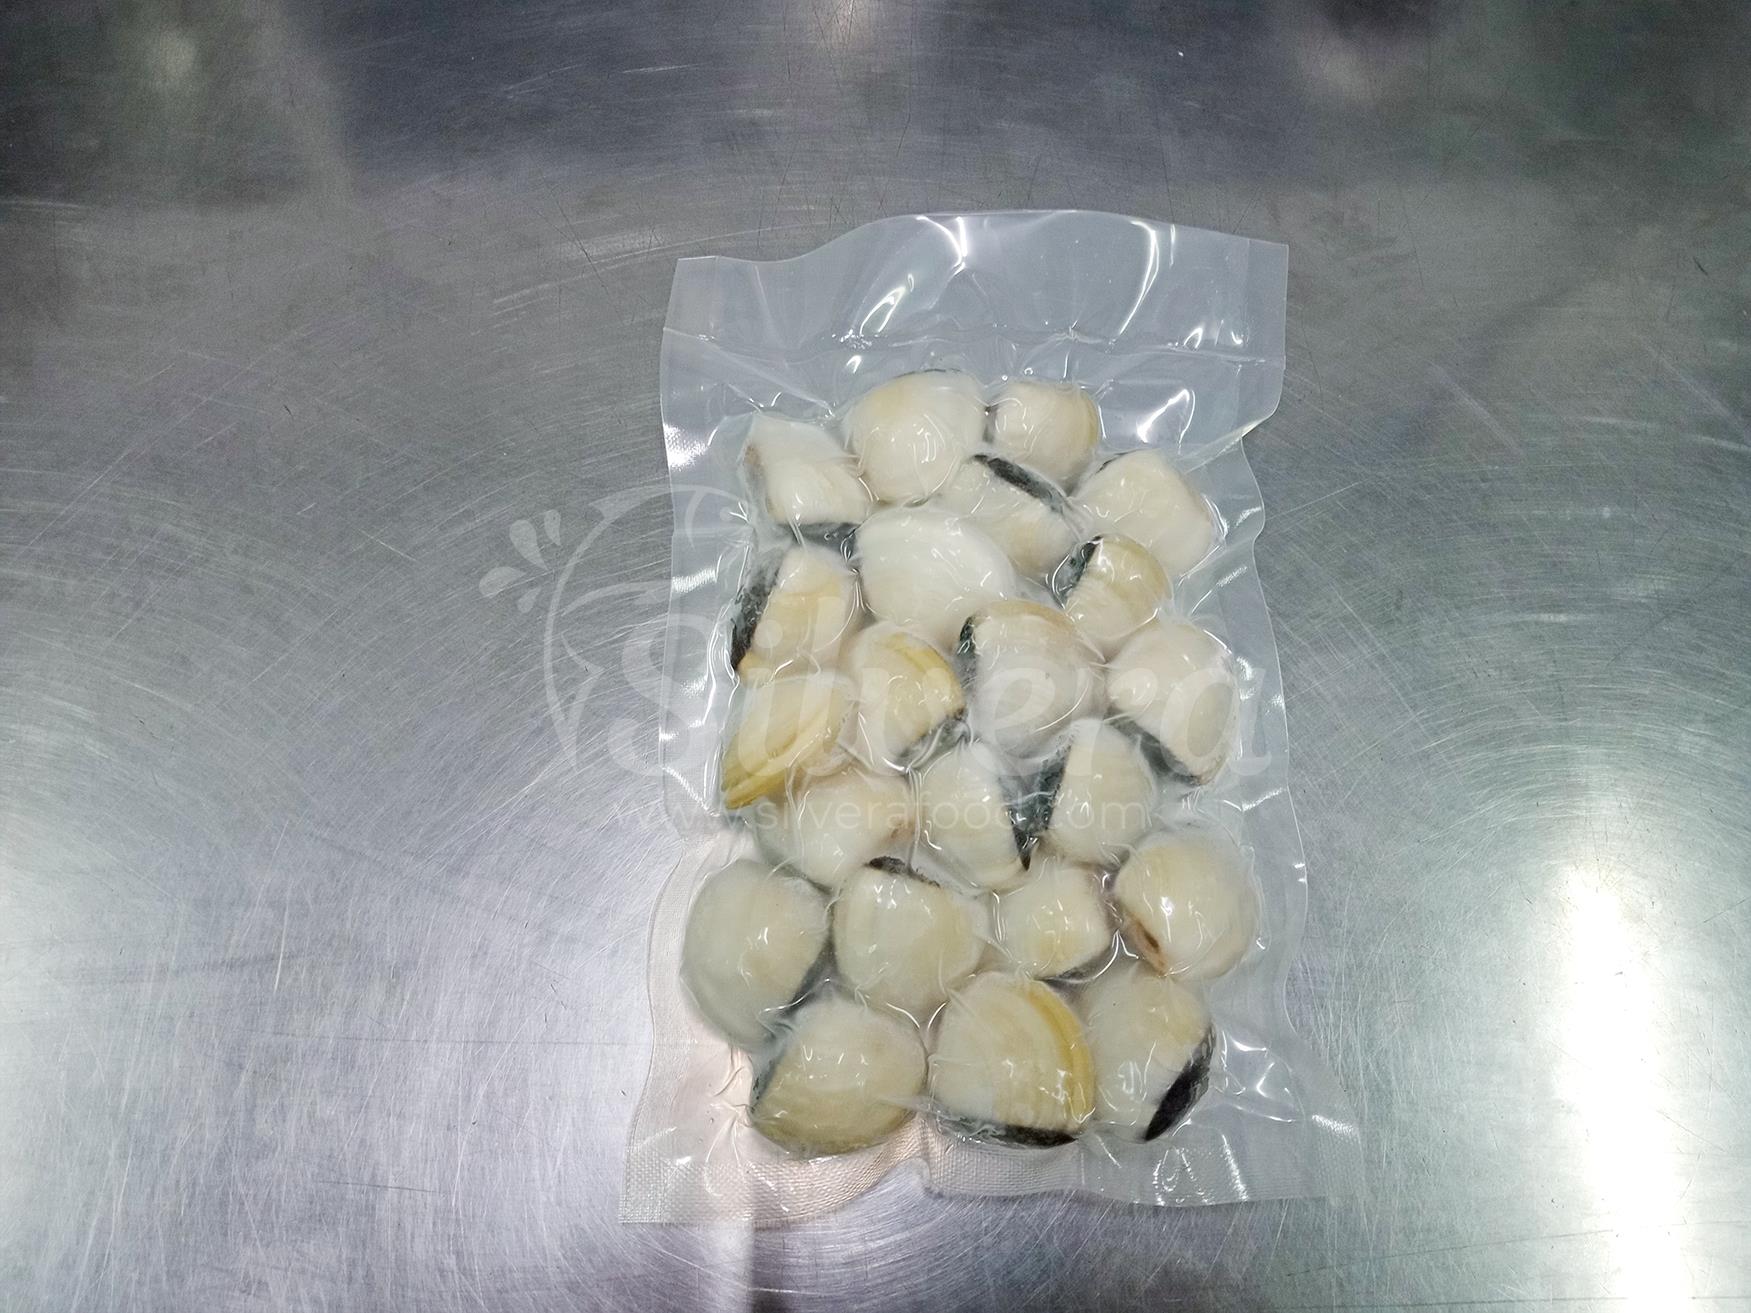 Vacuum packed bag of fully cooked whole white clams